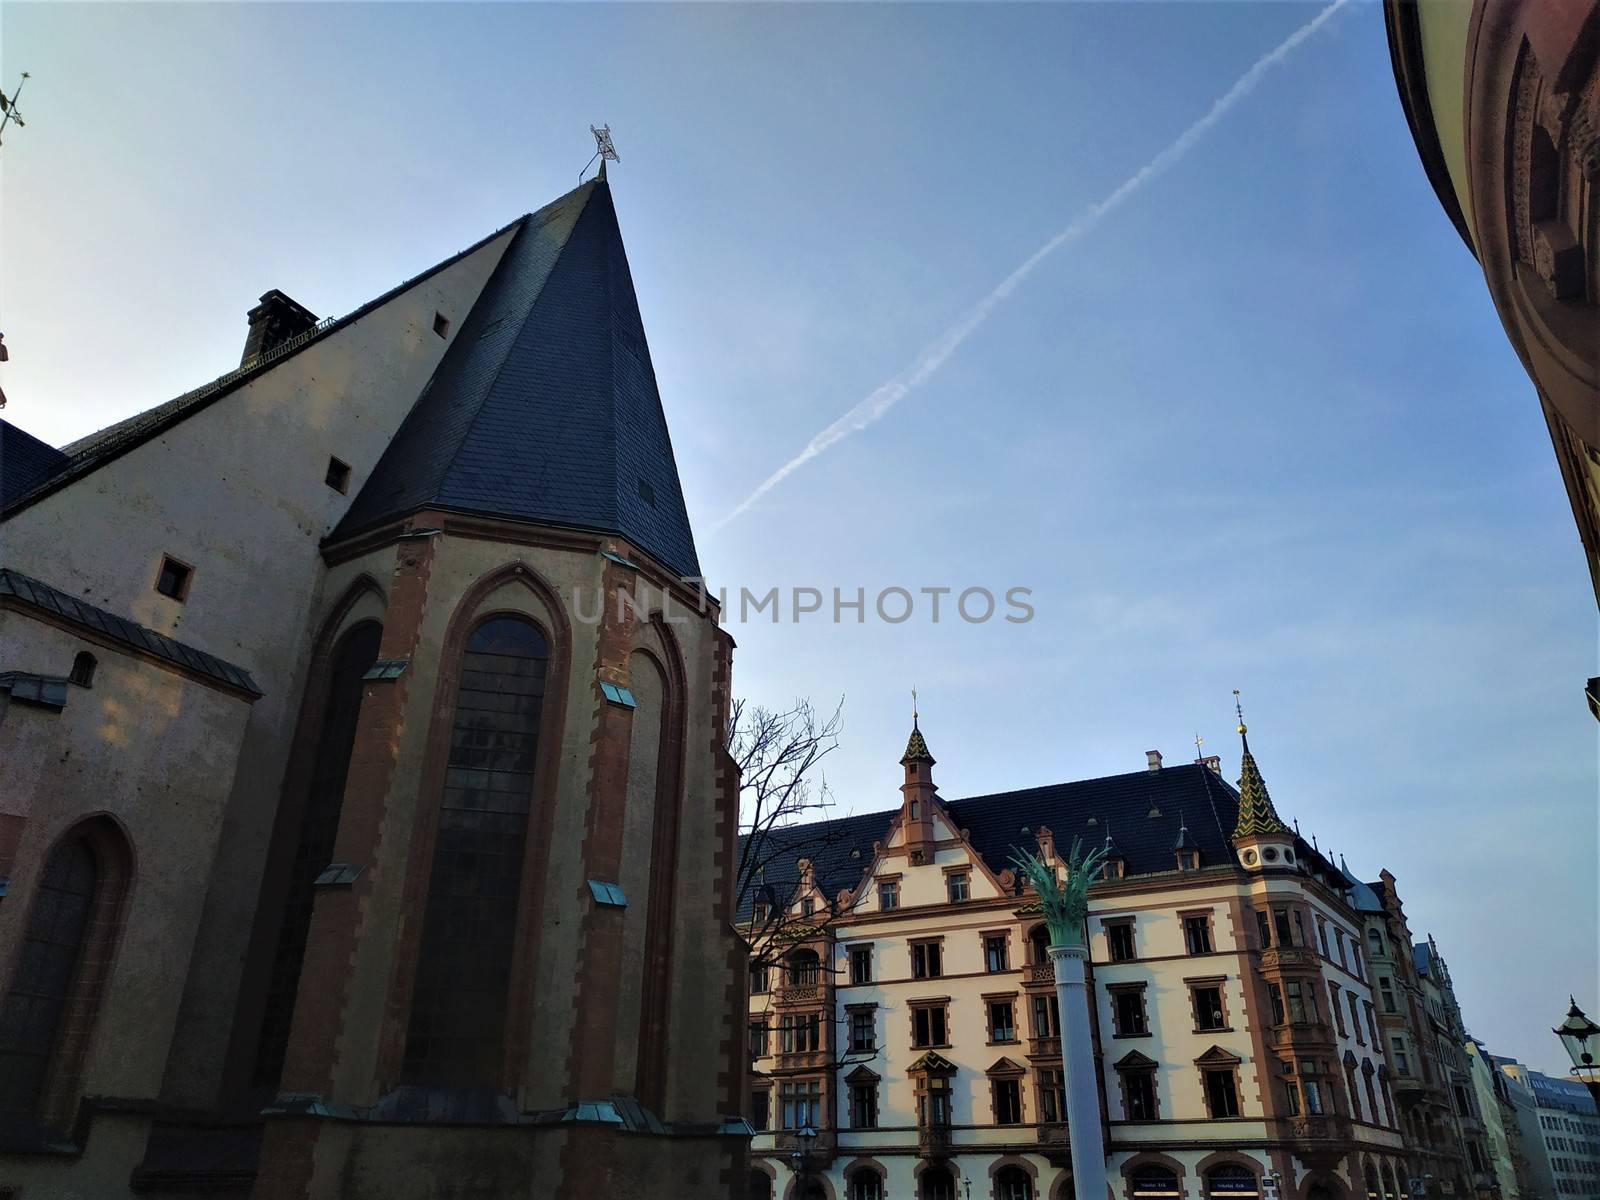 View overt the Nikolai churchyard in the city center of Leipzig by pisces2386